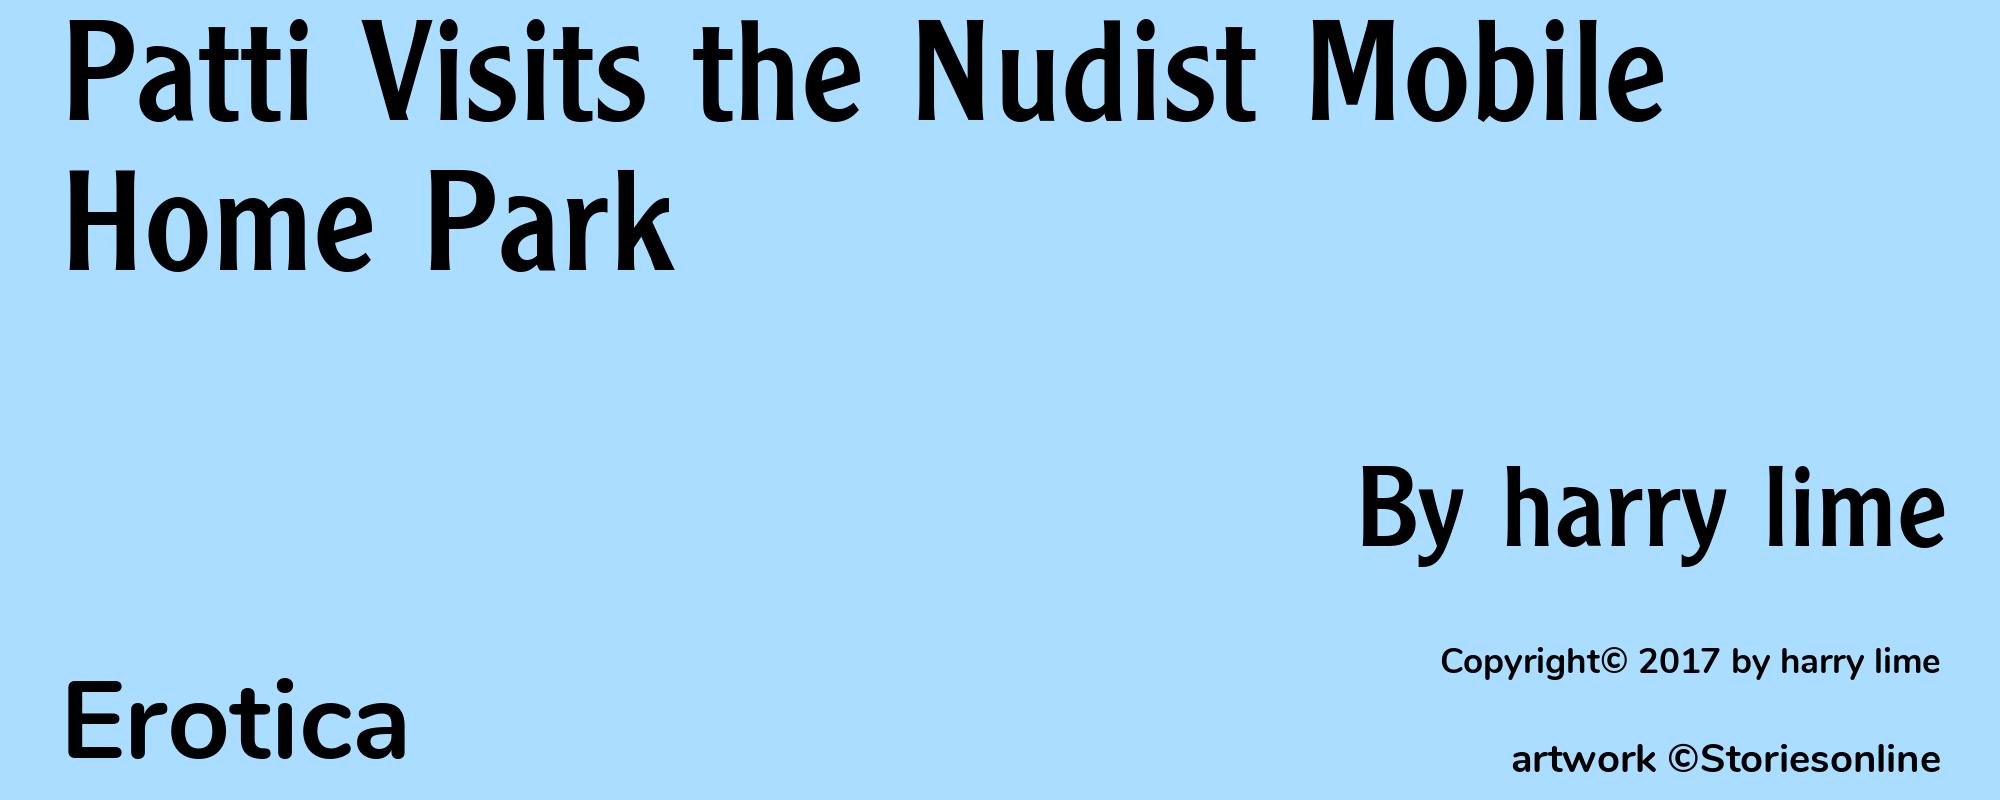 Patti Visits the Nudist Mobile Home Park - Cover